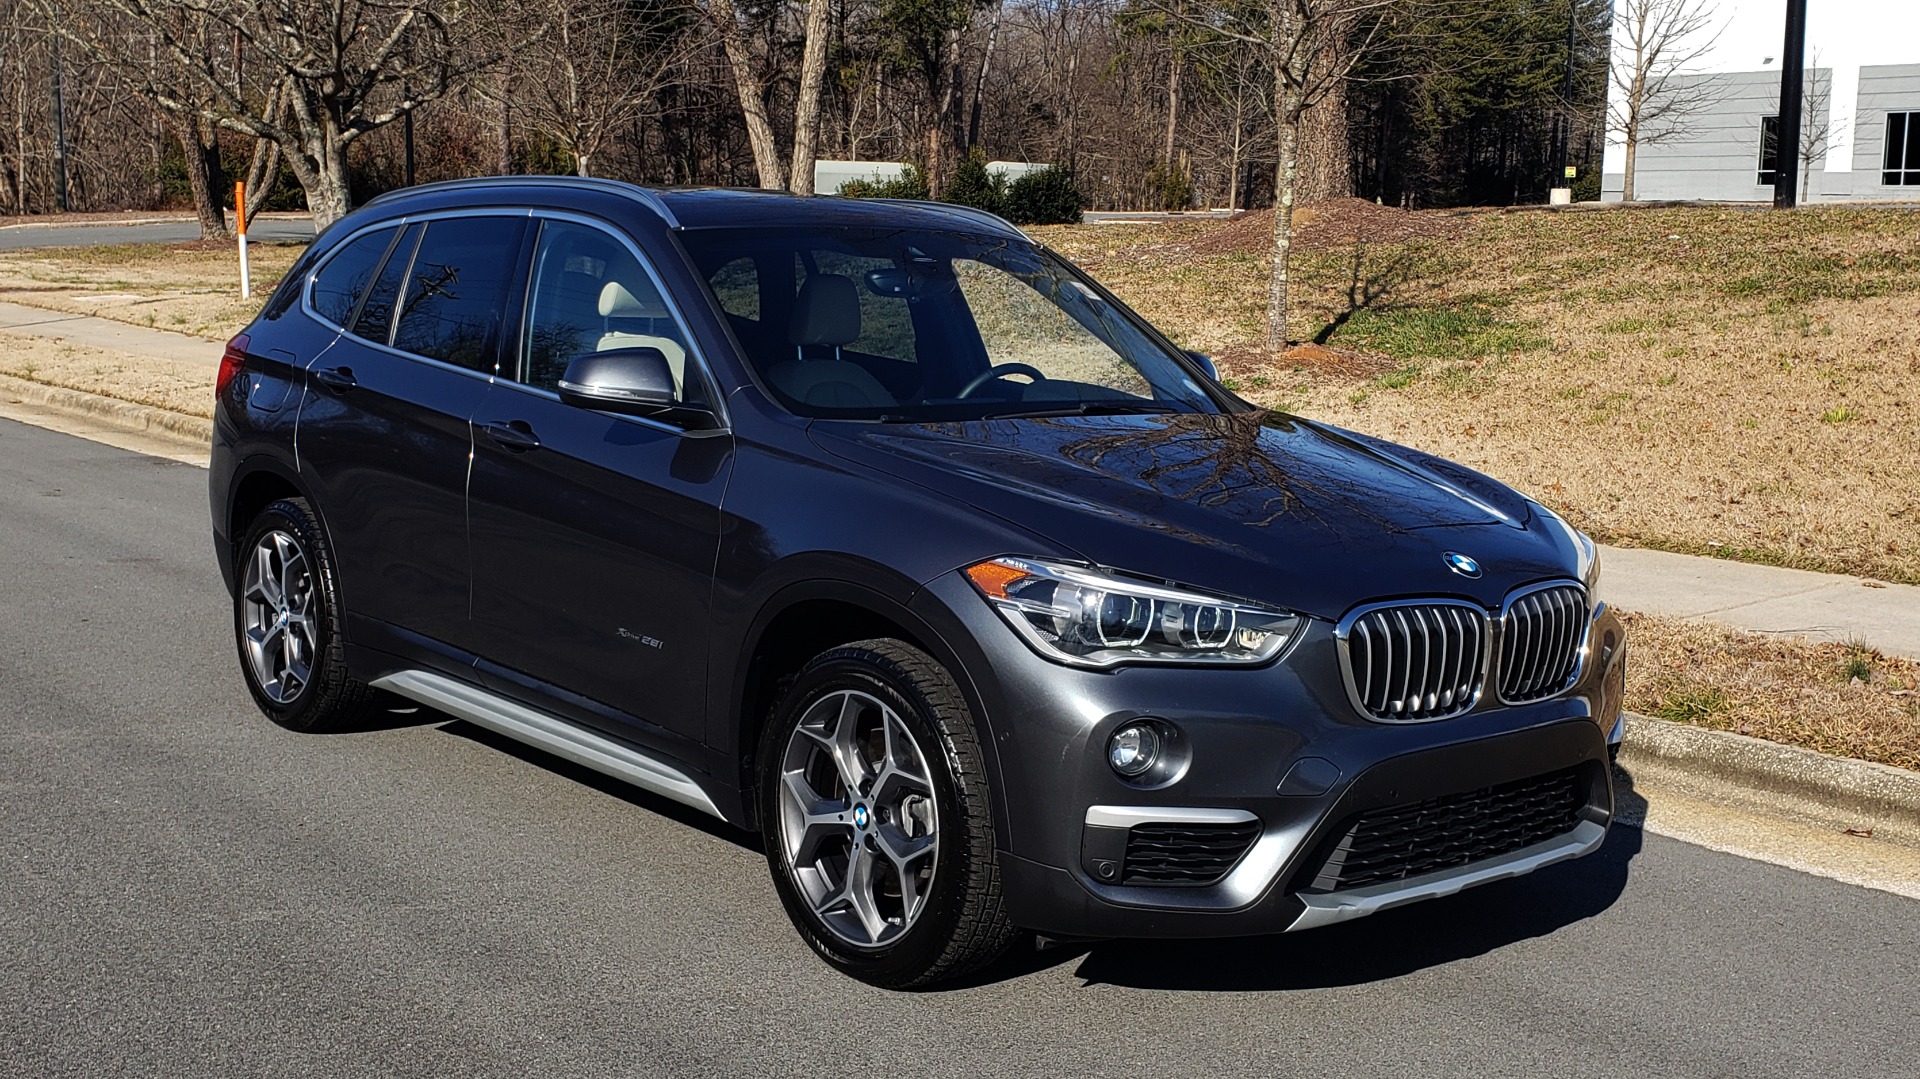 Used 2017 BMW X1 XDRIVE28I / PREM / TECH / DRVR ASST PLUS / COLD WTHR / REARVIEW for sale Sold at Formula Imports in Charlotte NC 28227 4